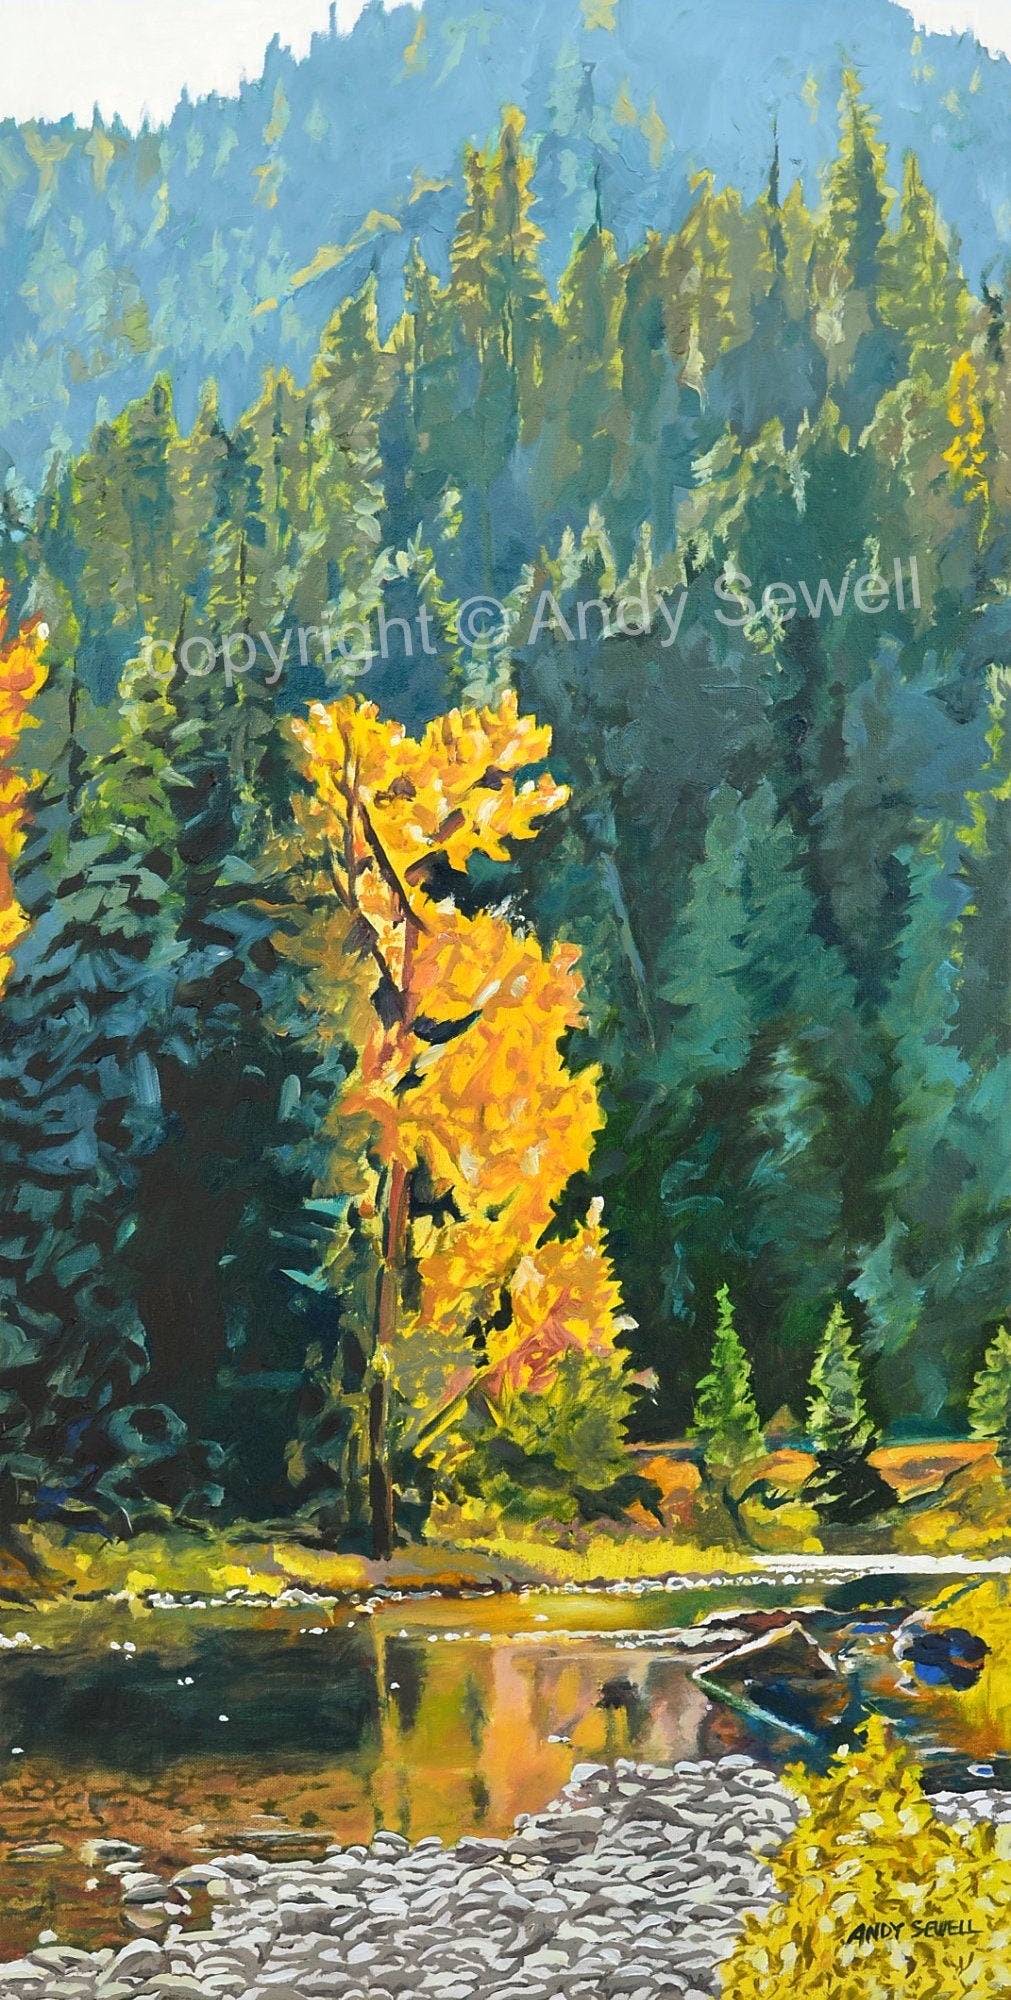 A "Clear Water Calm" - A signed edition print of one of Idaho's classic rivers in the fall.